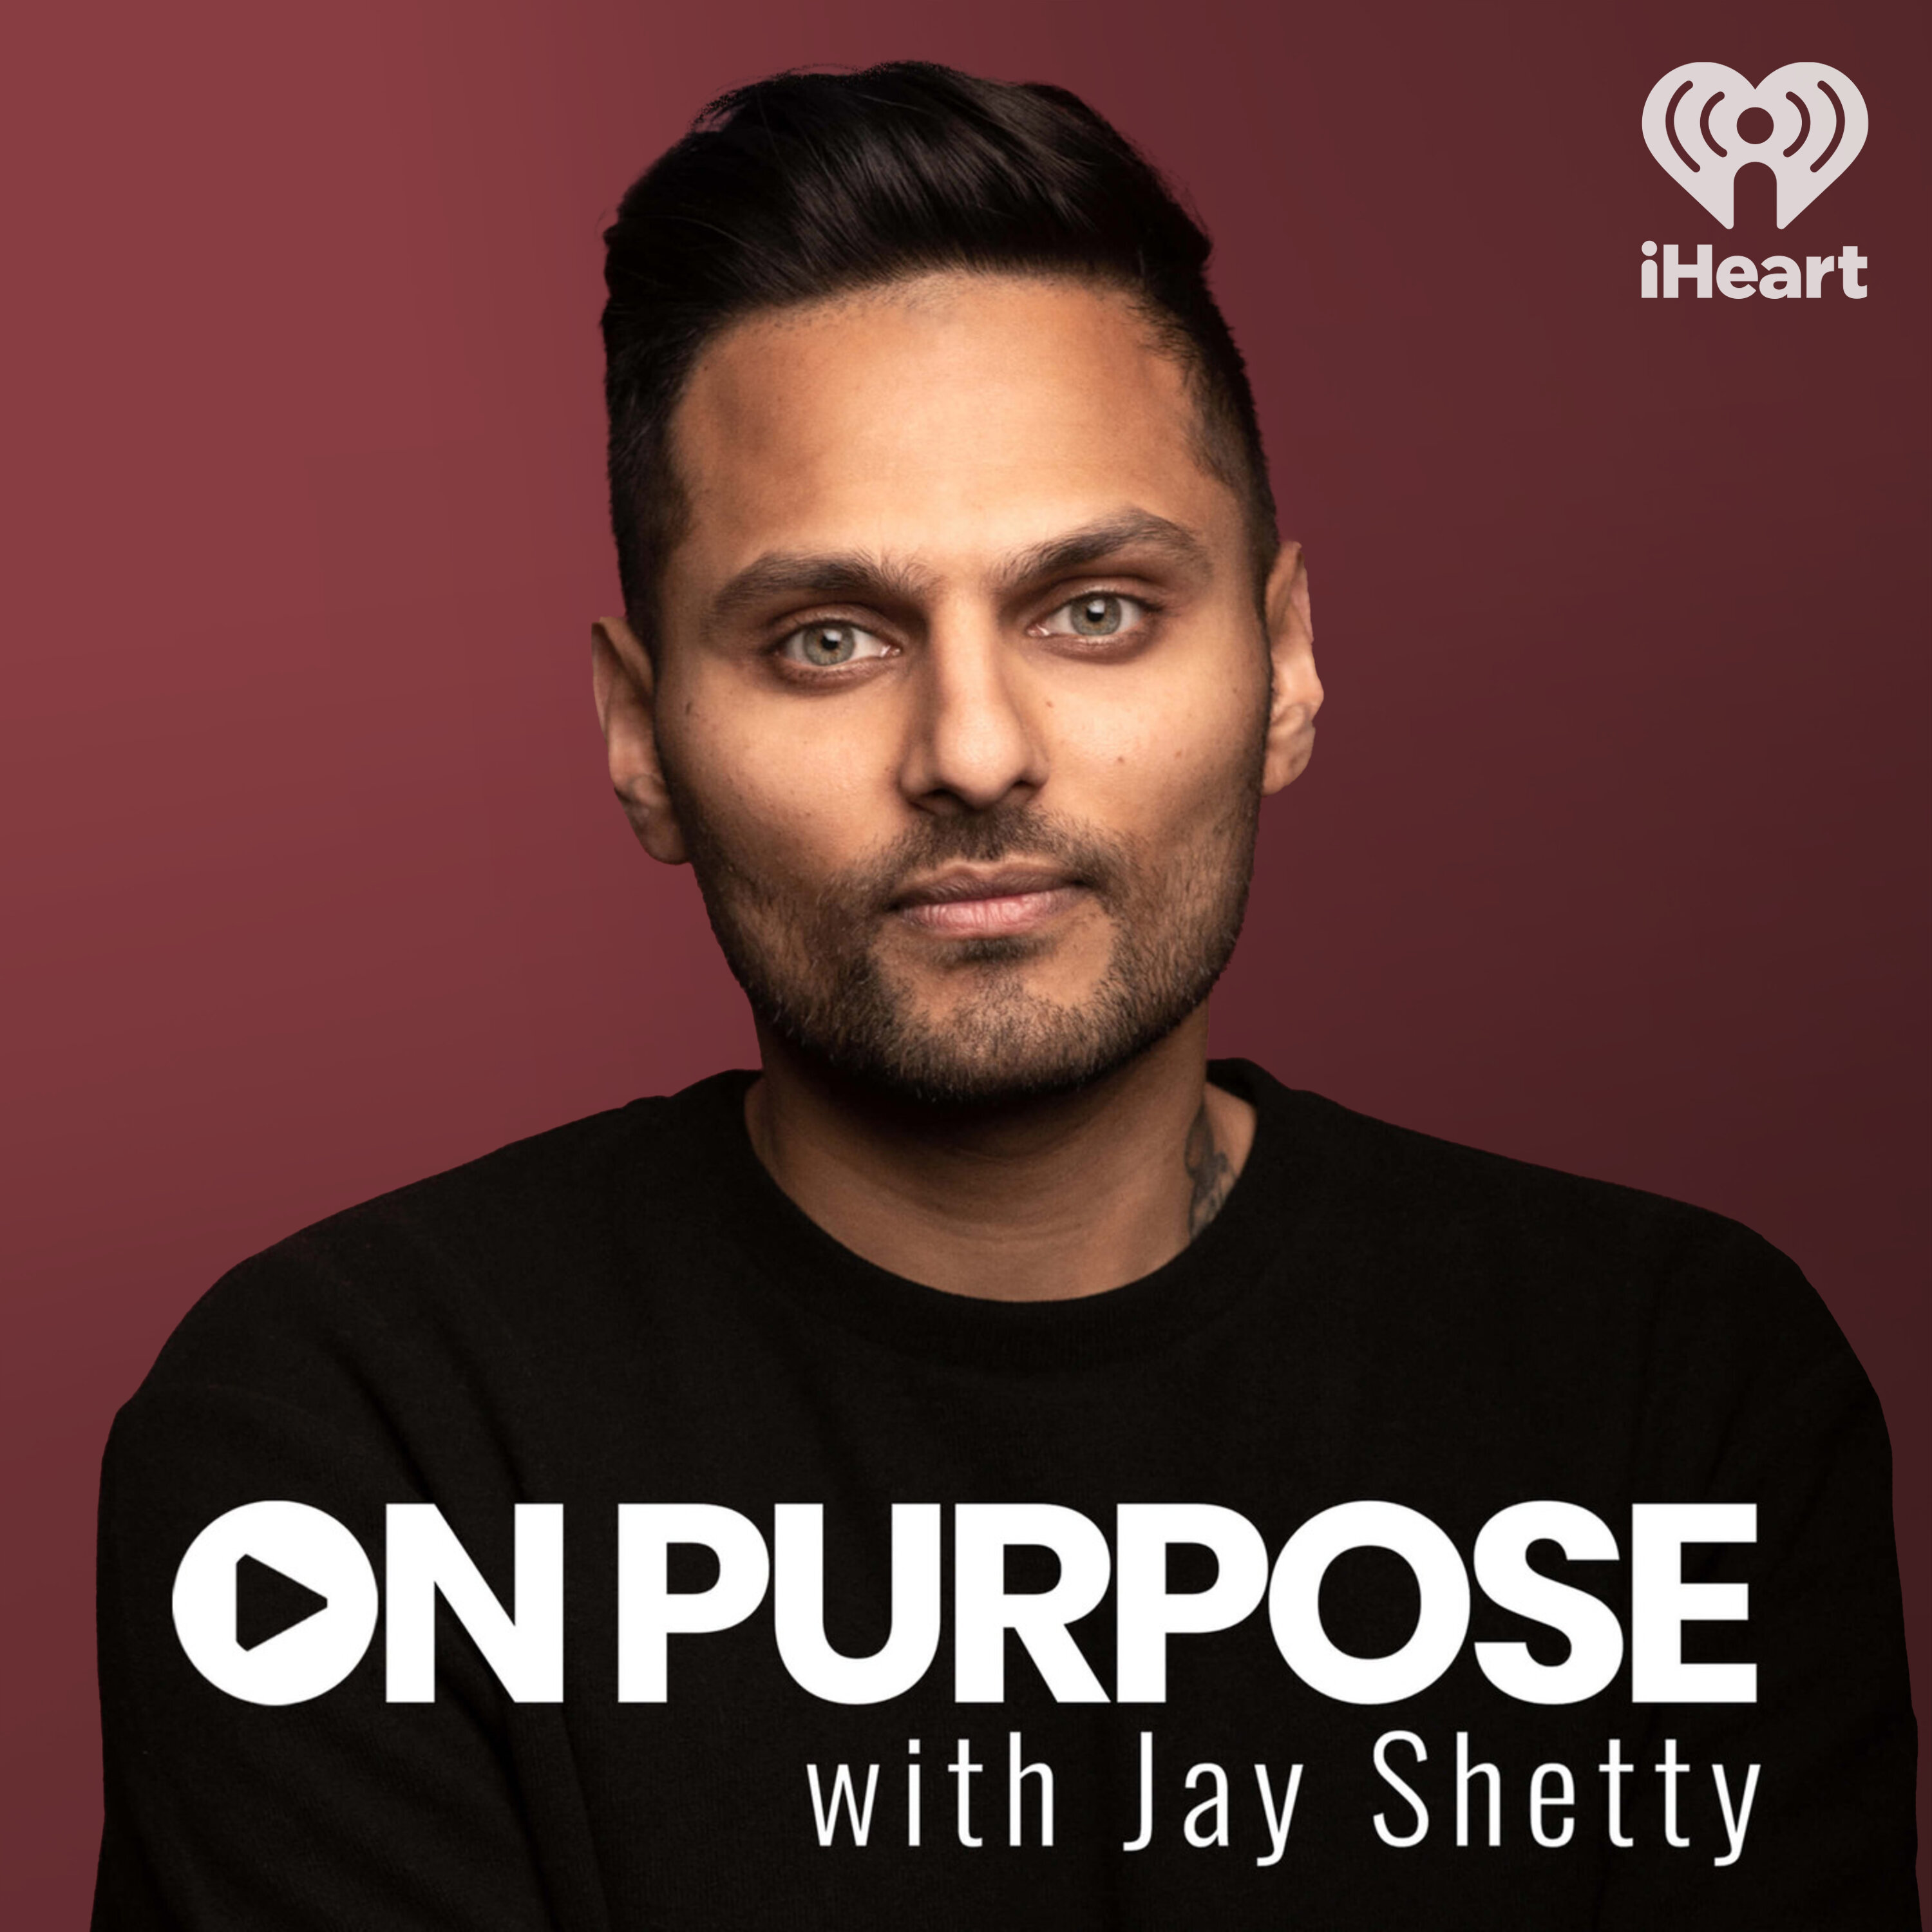 Jay Shetty Asks Daniel Pink Four Fill-in-the-Blank Rapid Fire Questions